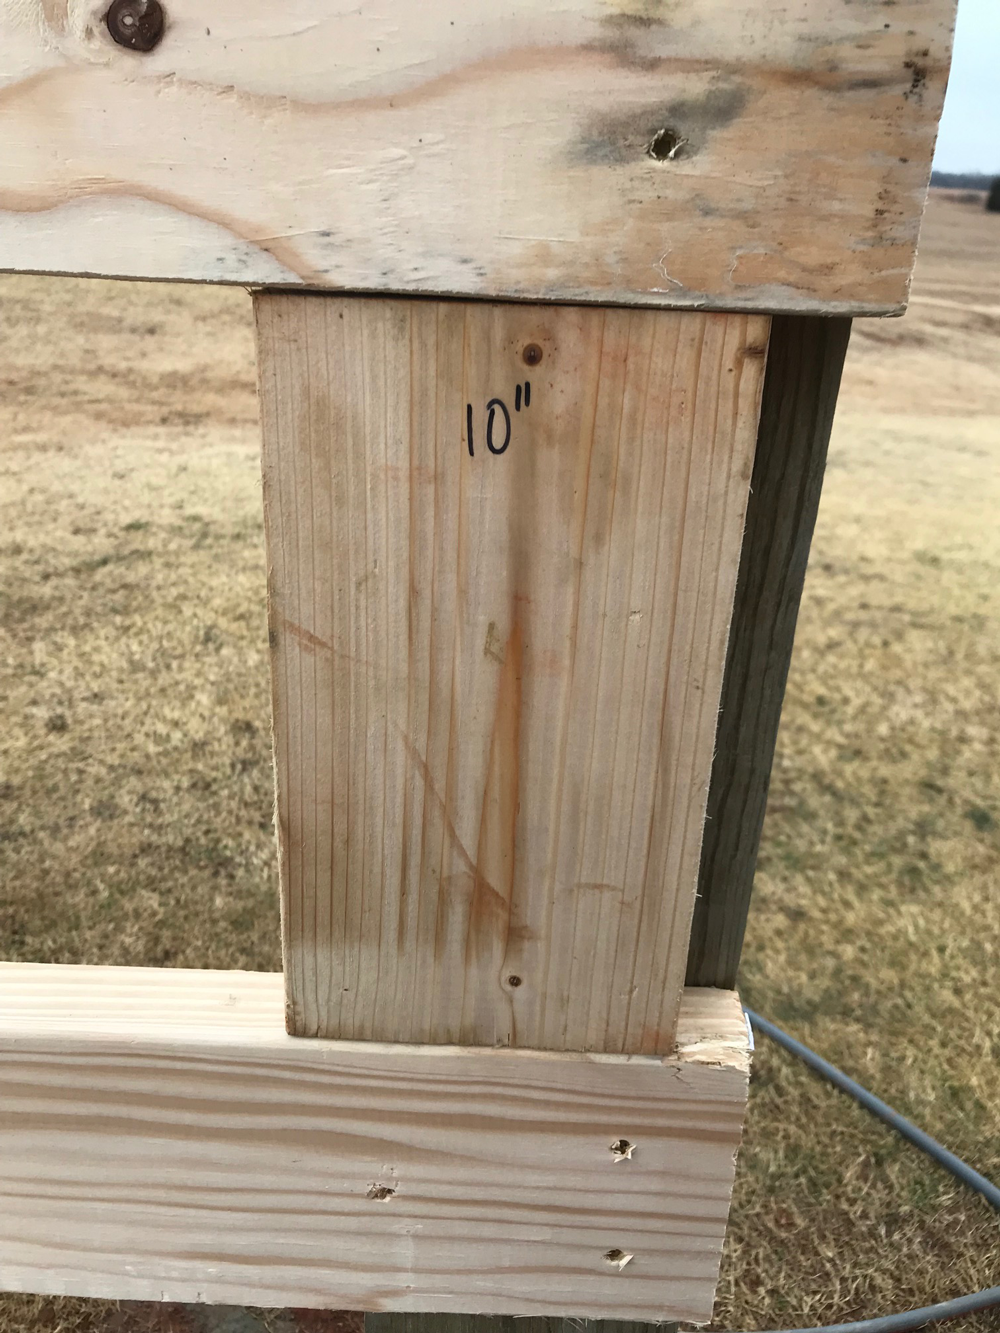 Easily place a gap between boards when building a split rail fence.